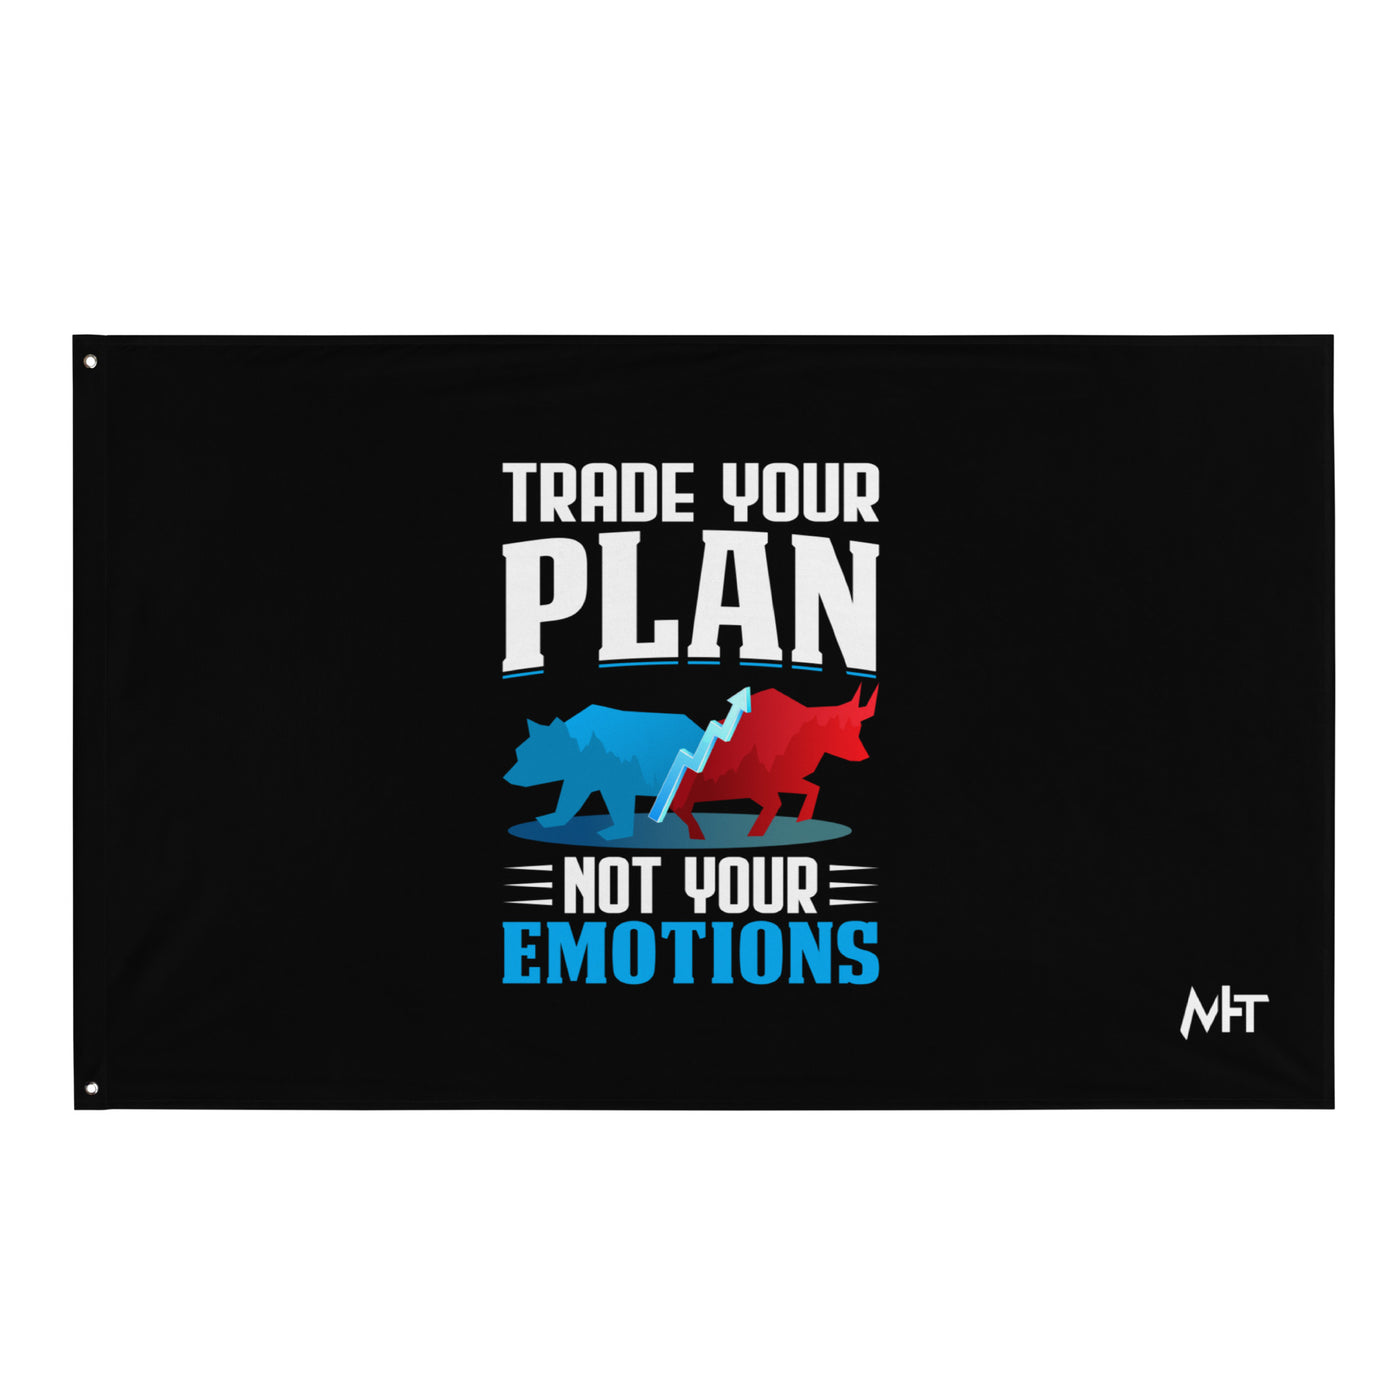 Trade your plan: not your emotion - Flag